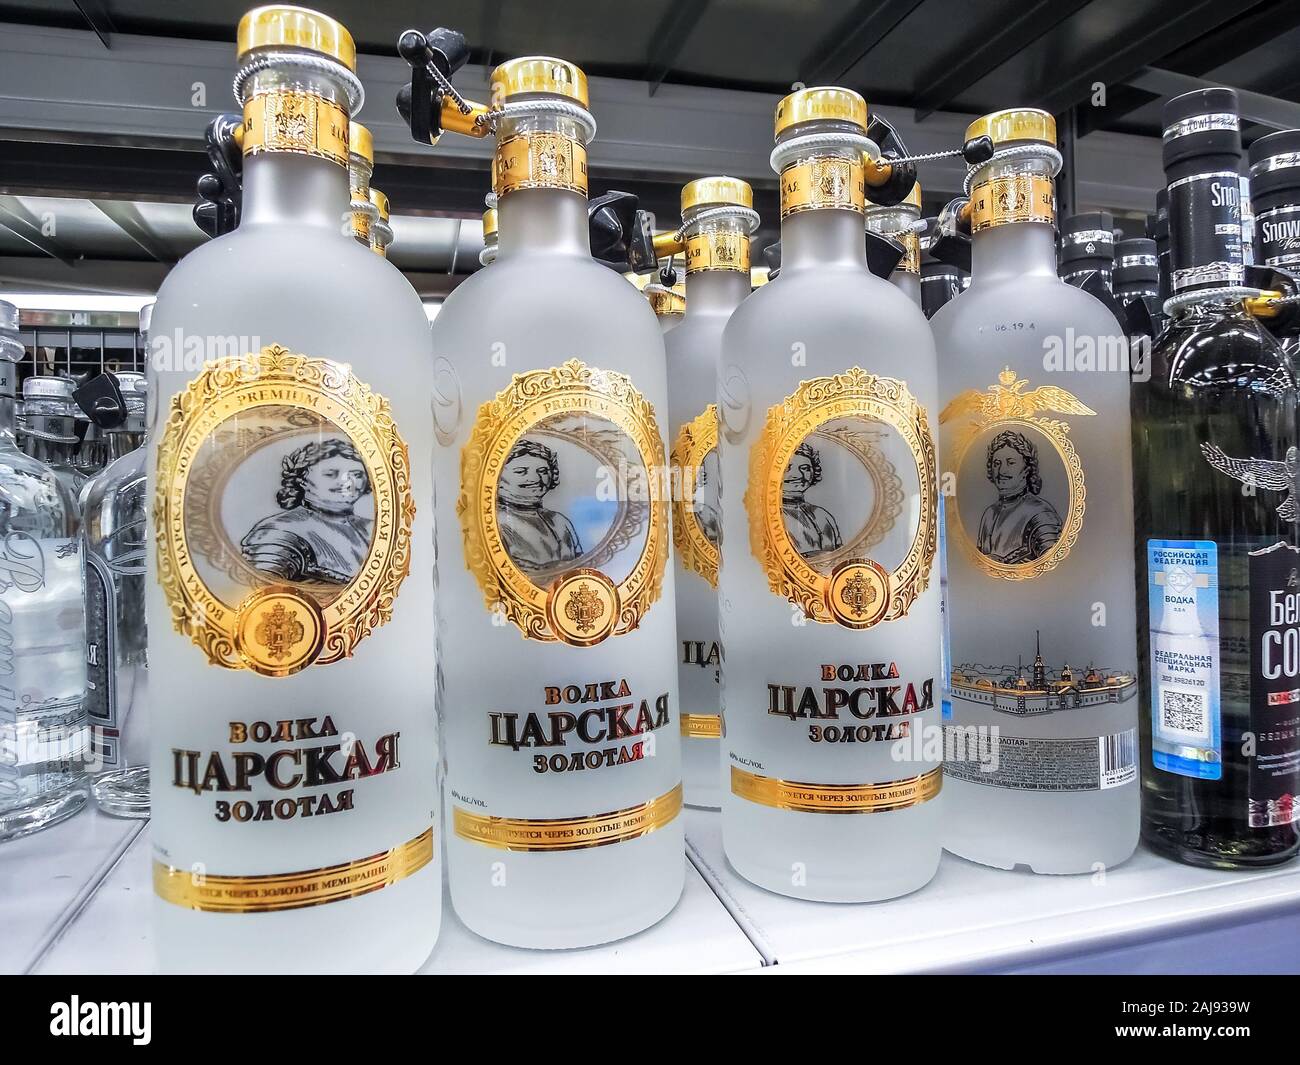 Samara, Russia - December 29, 2019: Russian vodka ready for sale on the shelf in superstore. Various bottled alcoholic beverages Stock Photo